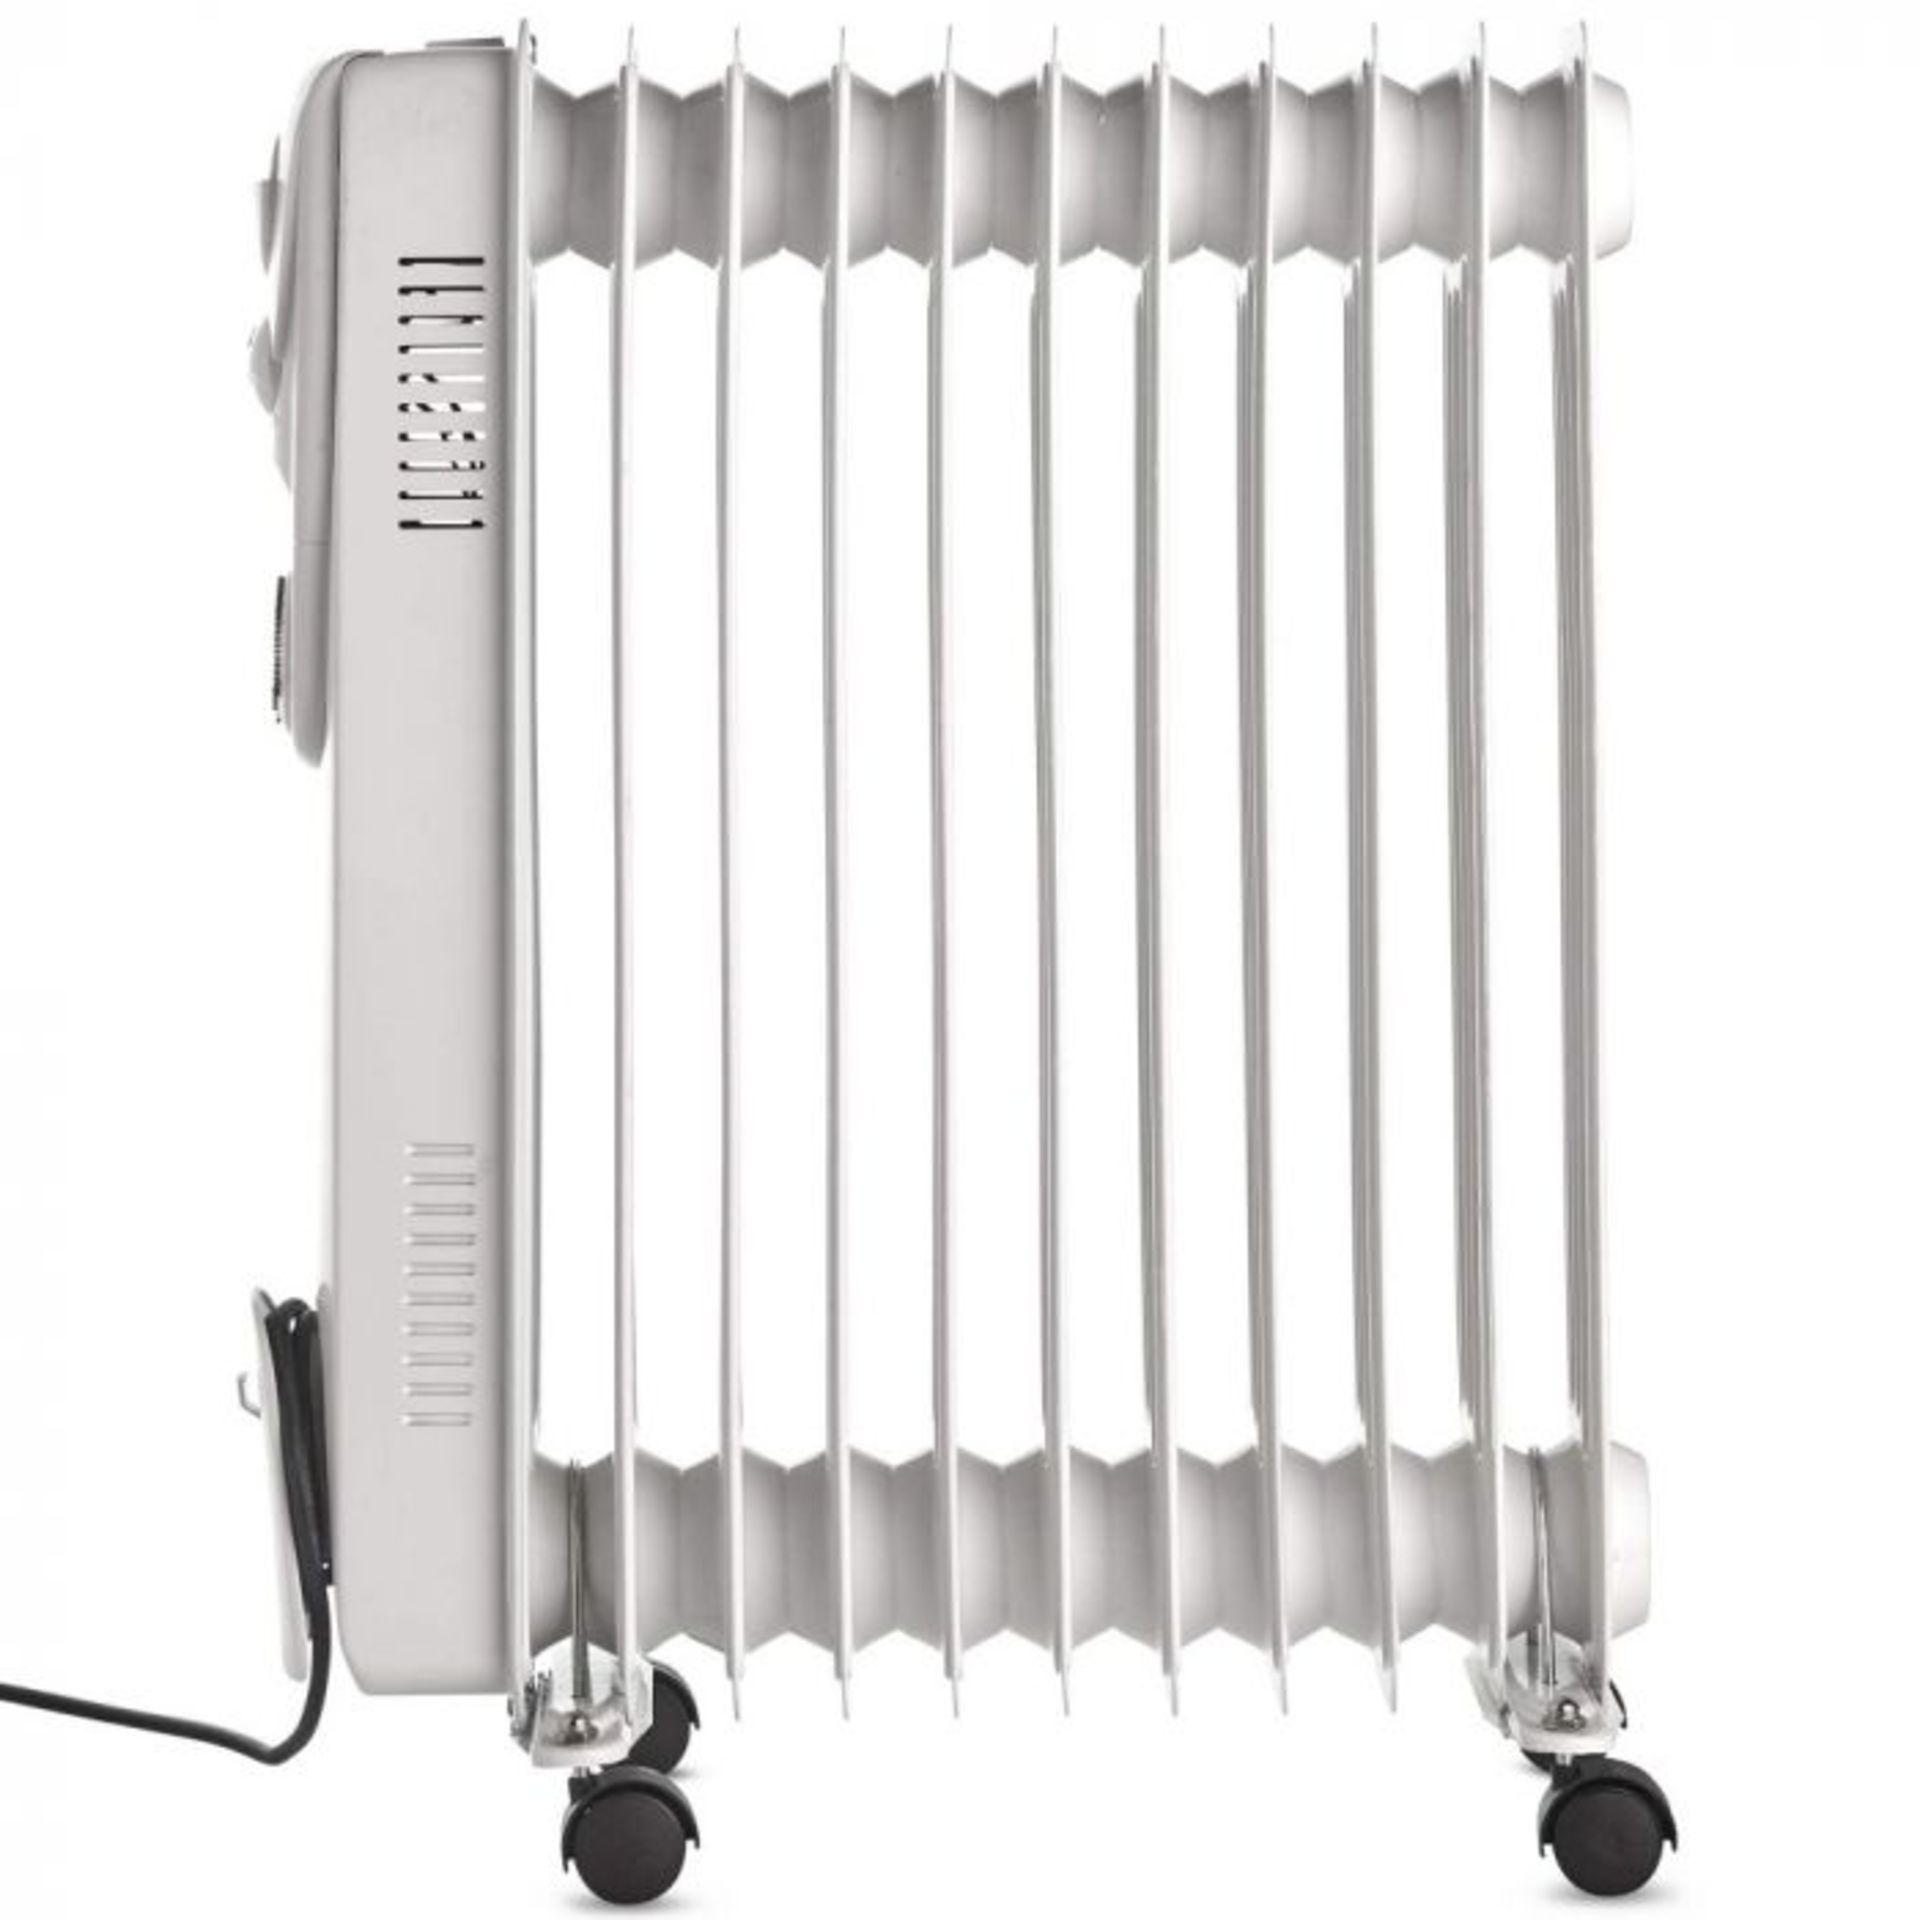 (S42) 11 Fin 2500W Oil Filled Radiator - White Suitable for areas up to 28 square metres 3 po...